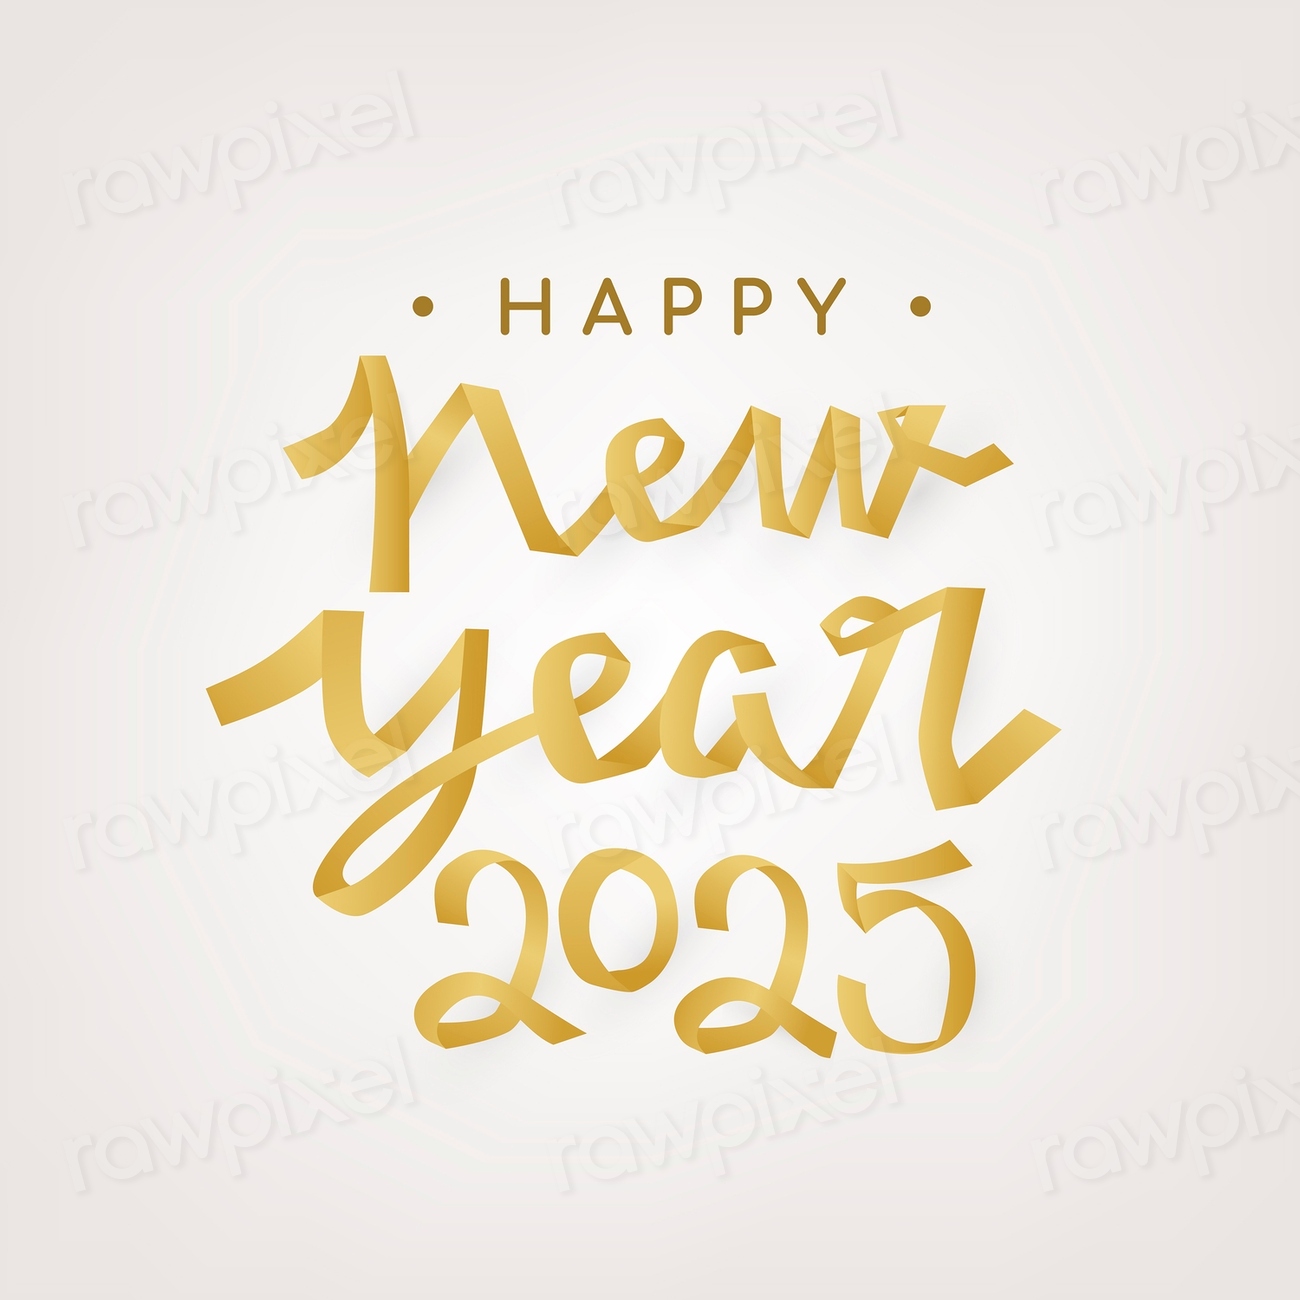 happy-new-year-2025-gold-free-photo-rawpixel